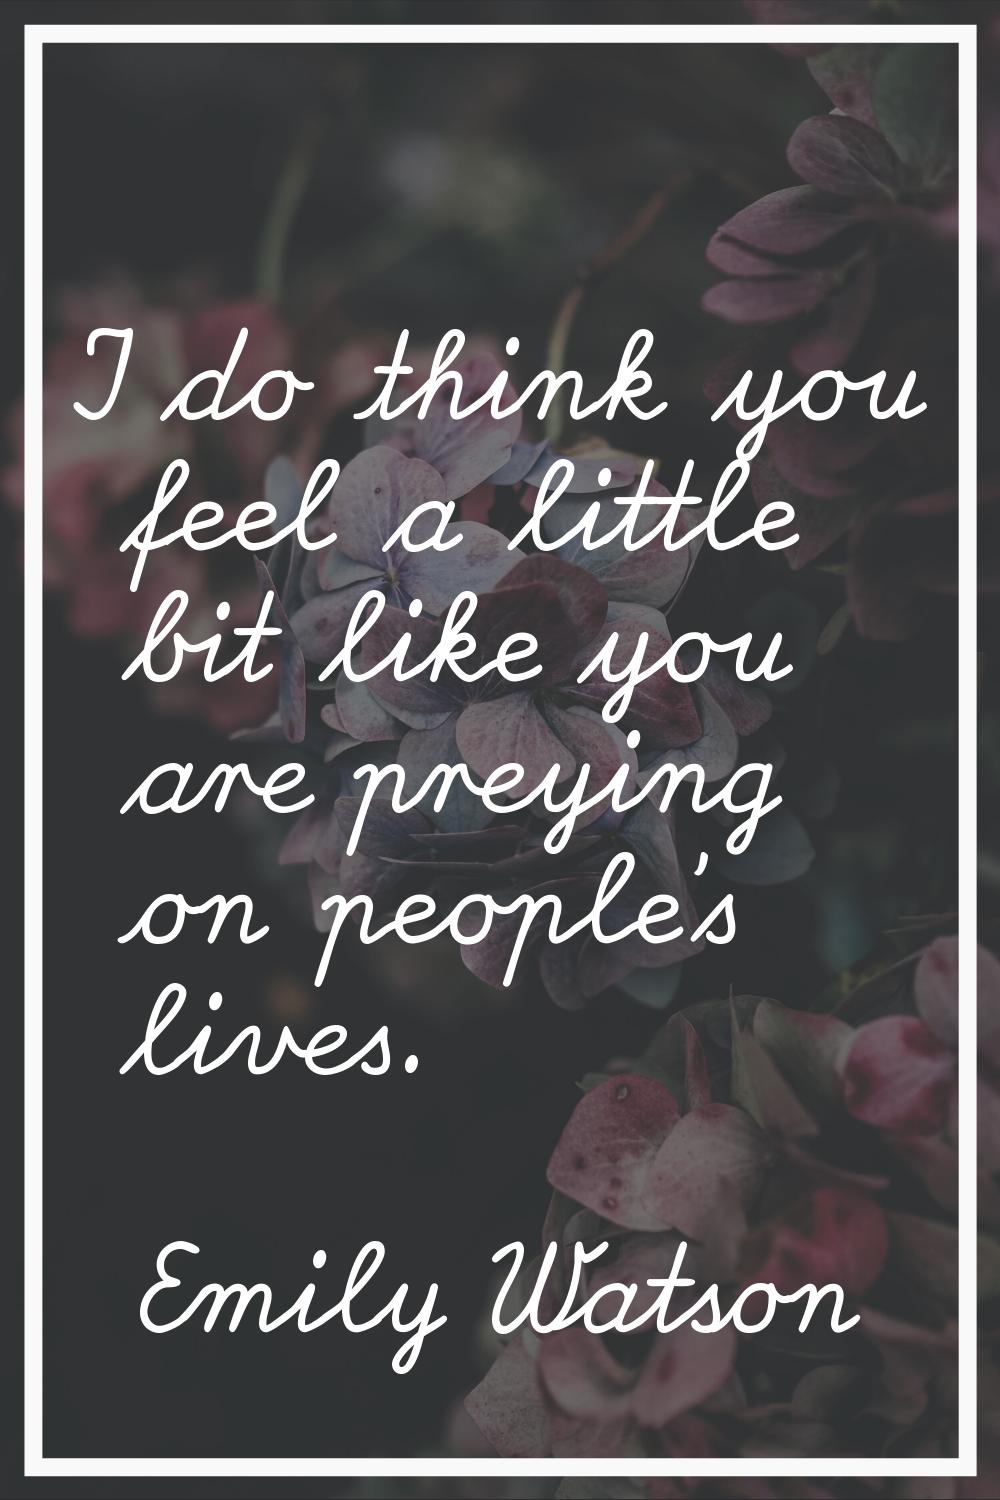 I do think you feel a little bit like you are preying on people's lives.